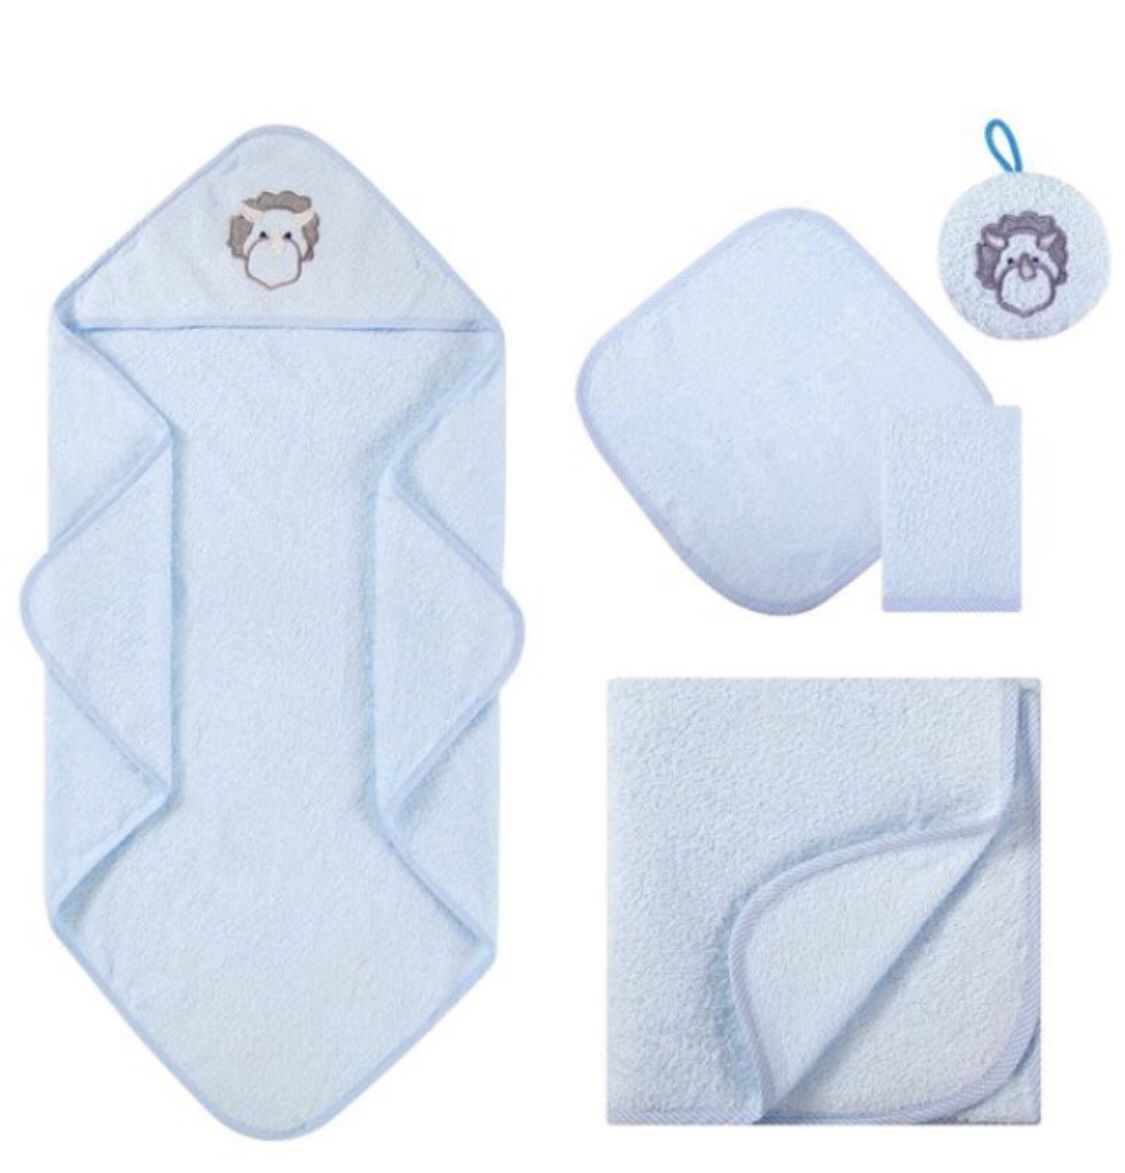 Baby Hooded Bath Towel Set for Boys Girls, Baby Bath Towels, Washcloths, Hooded Towel Cotton Terry for Newborn and Infants